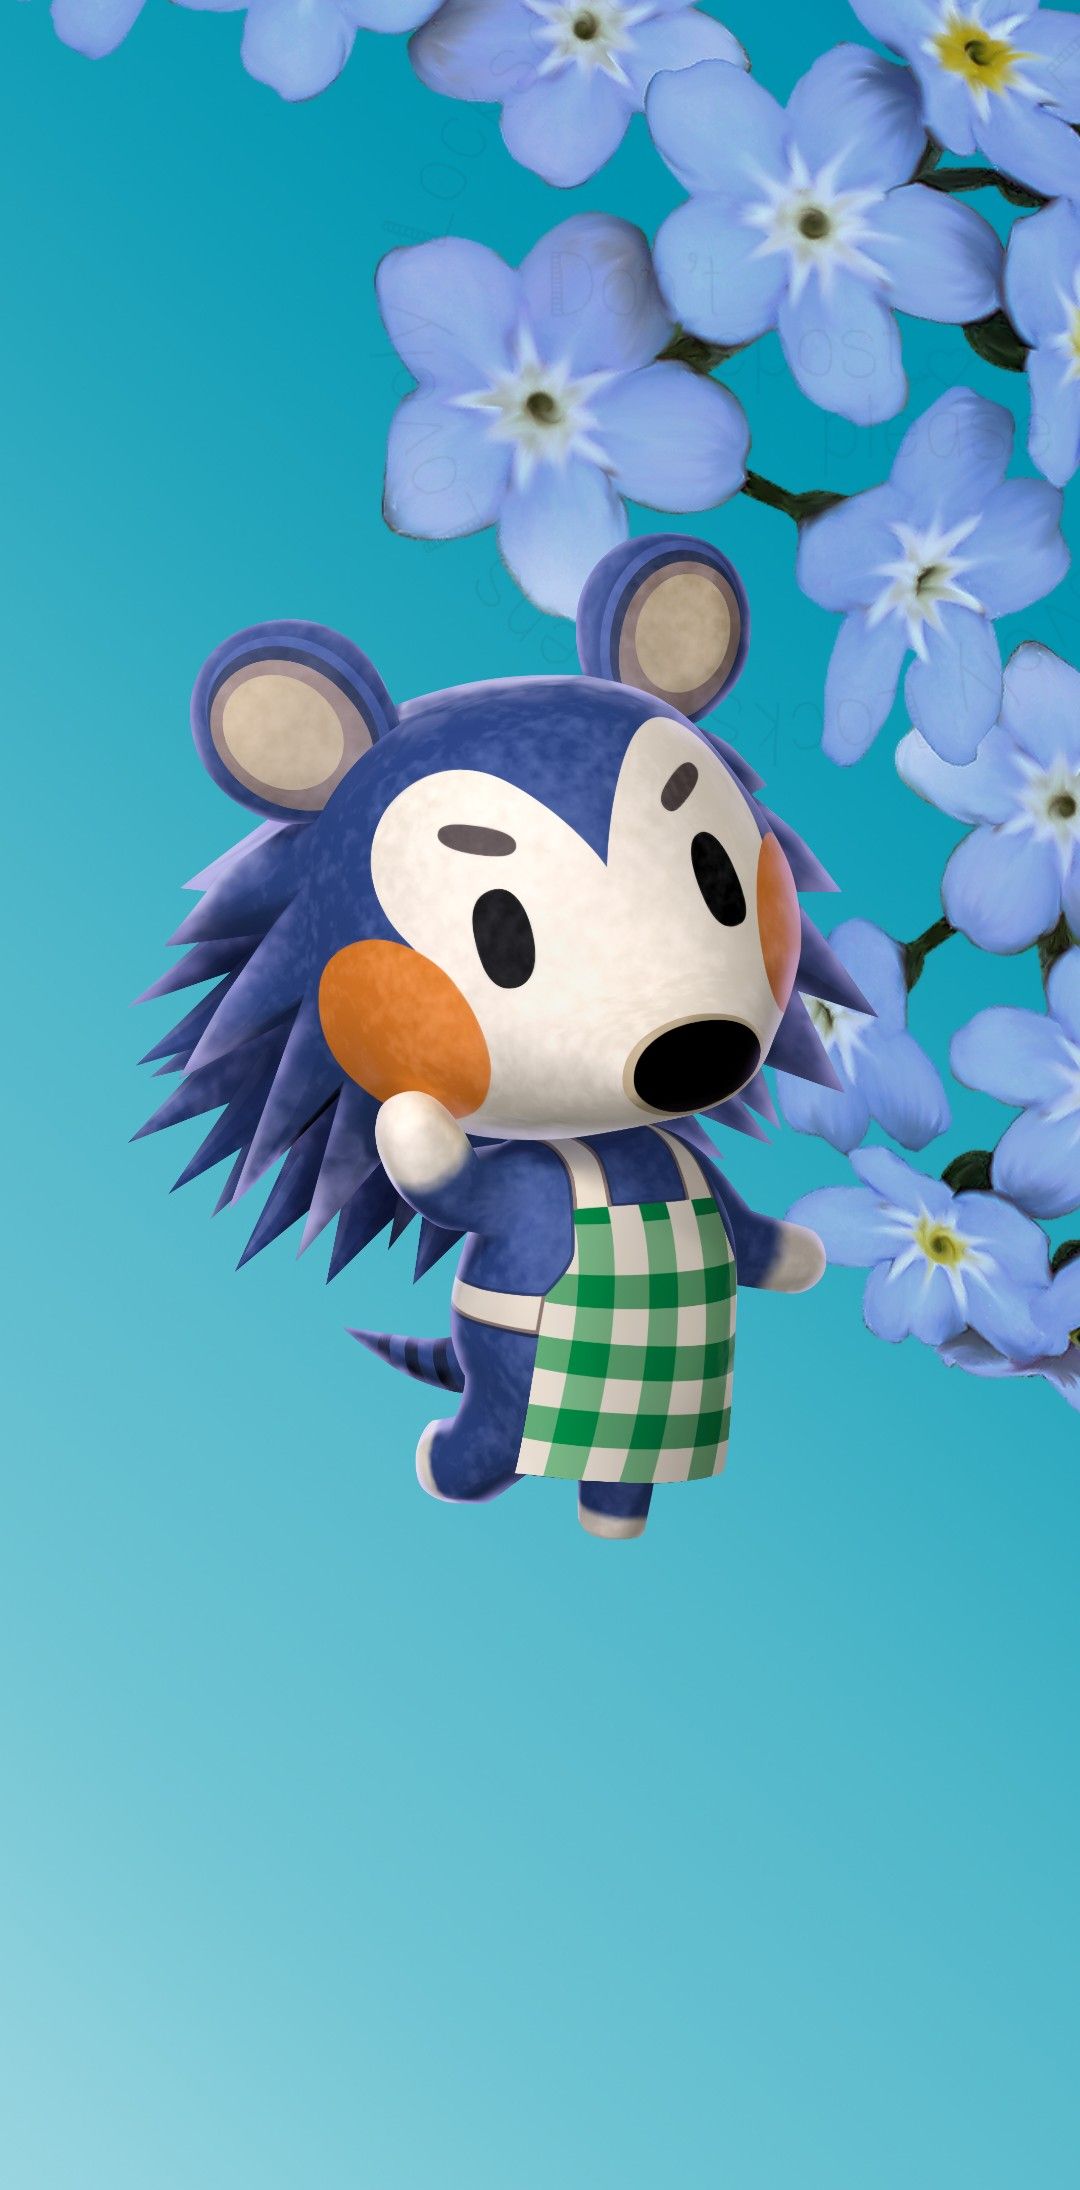 Animal Crossing Android Wallpapers - Wallpaper Cave - 1080 x 2190 jpeg 147kB